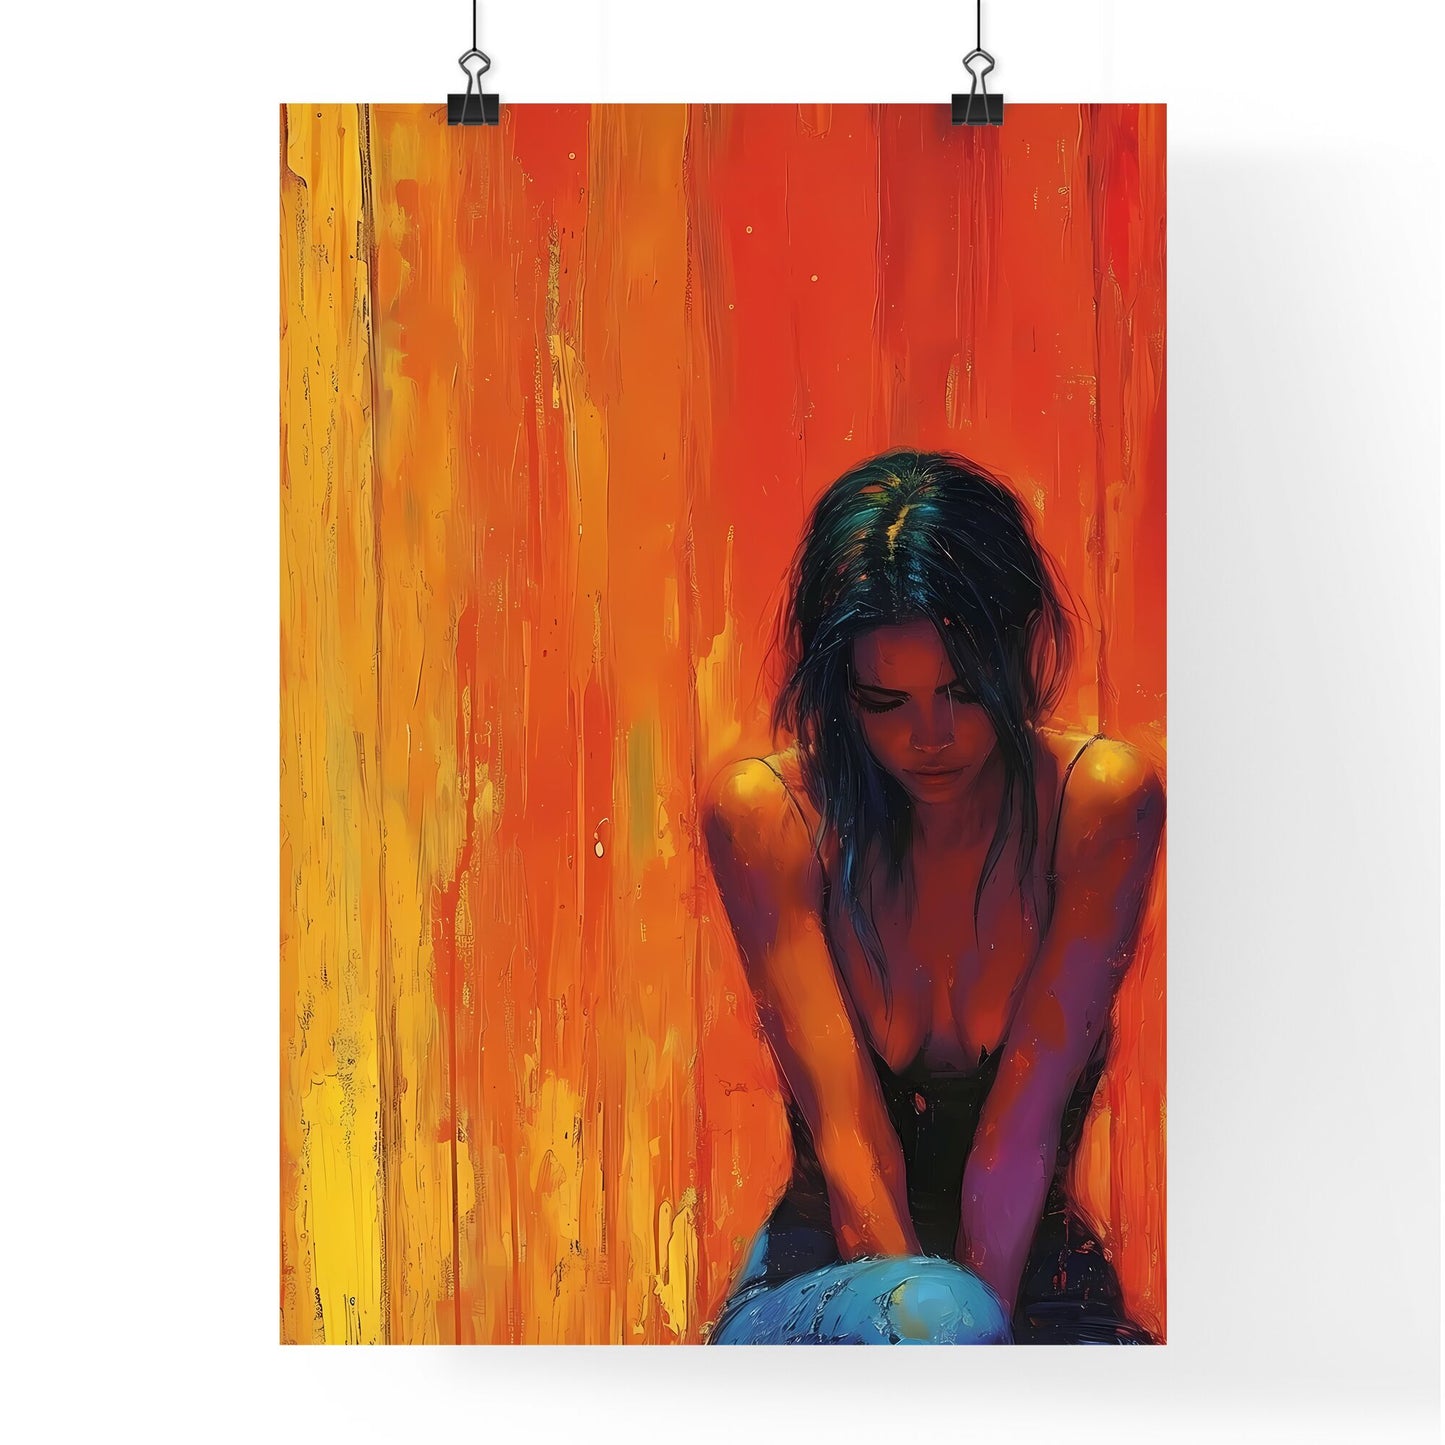 Minimalism, pin up art - Art print of a woman sitting down in front of a colorful wall Default Title